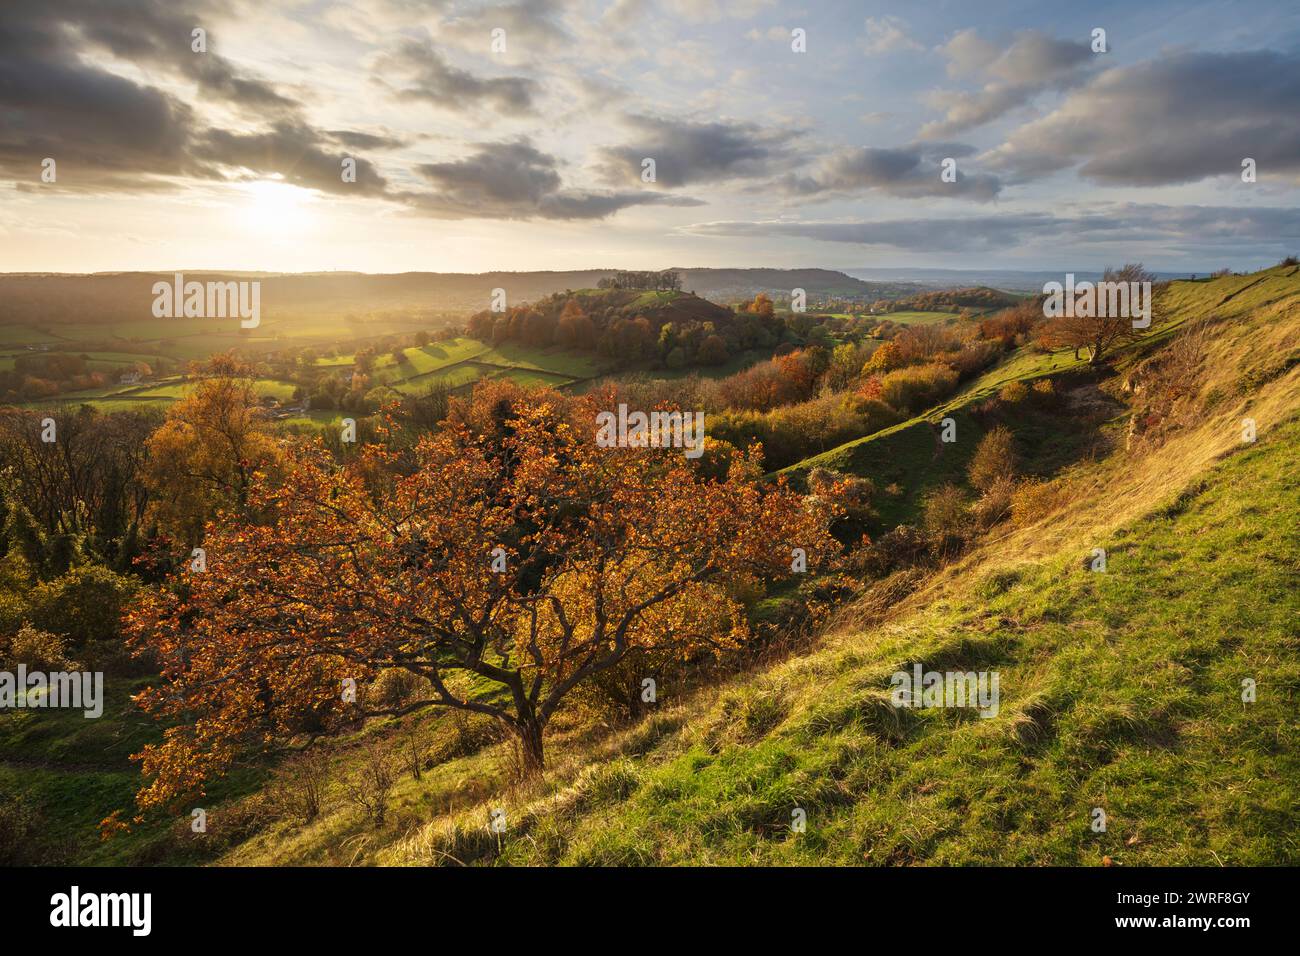 View to Dursley and Downham Hill from Uley Bury Hillfort at sunset in autumn, Dursley, Cotswolds, Gloucestershire, England, United Kingdom, Europe Stock Photo